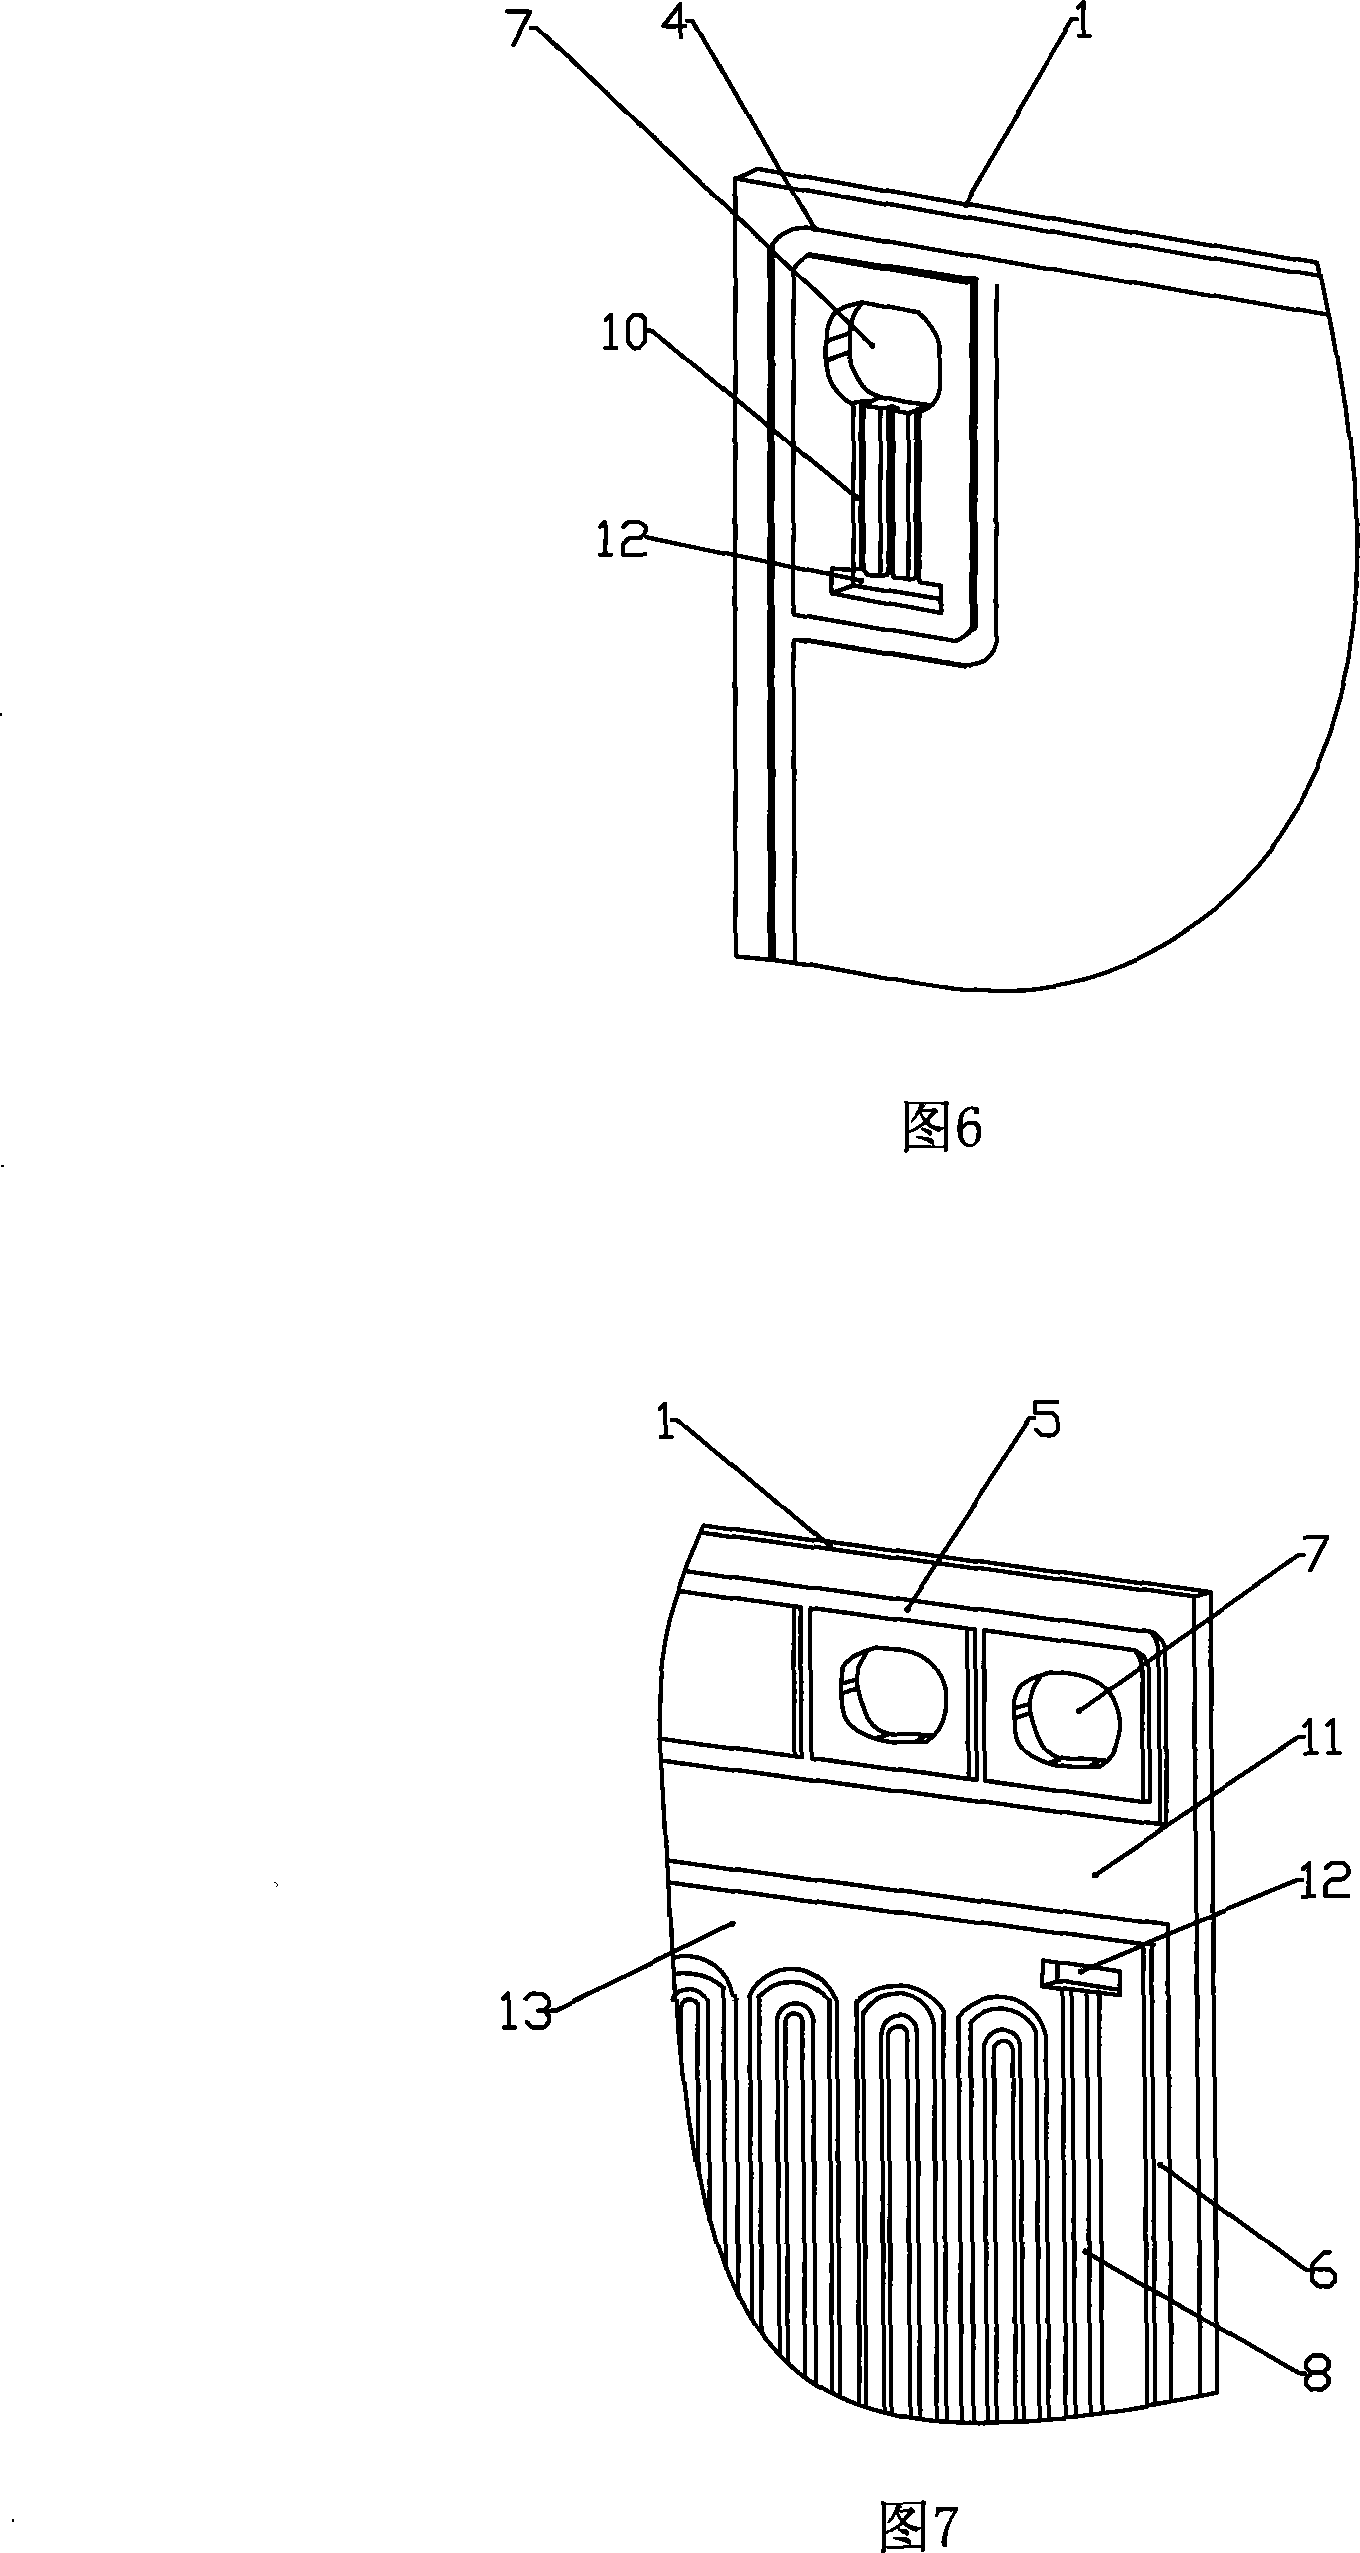 A detachable independently sealed fuel battery